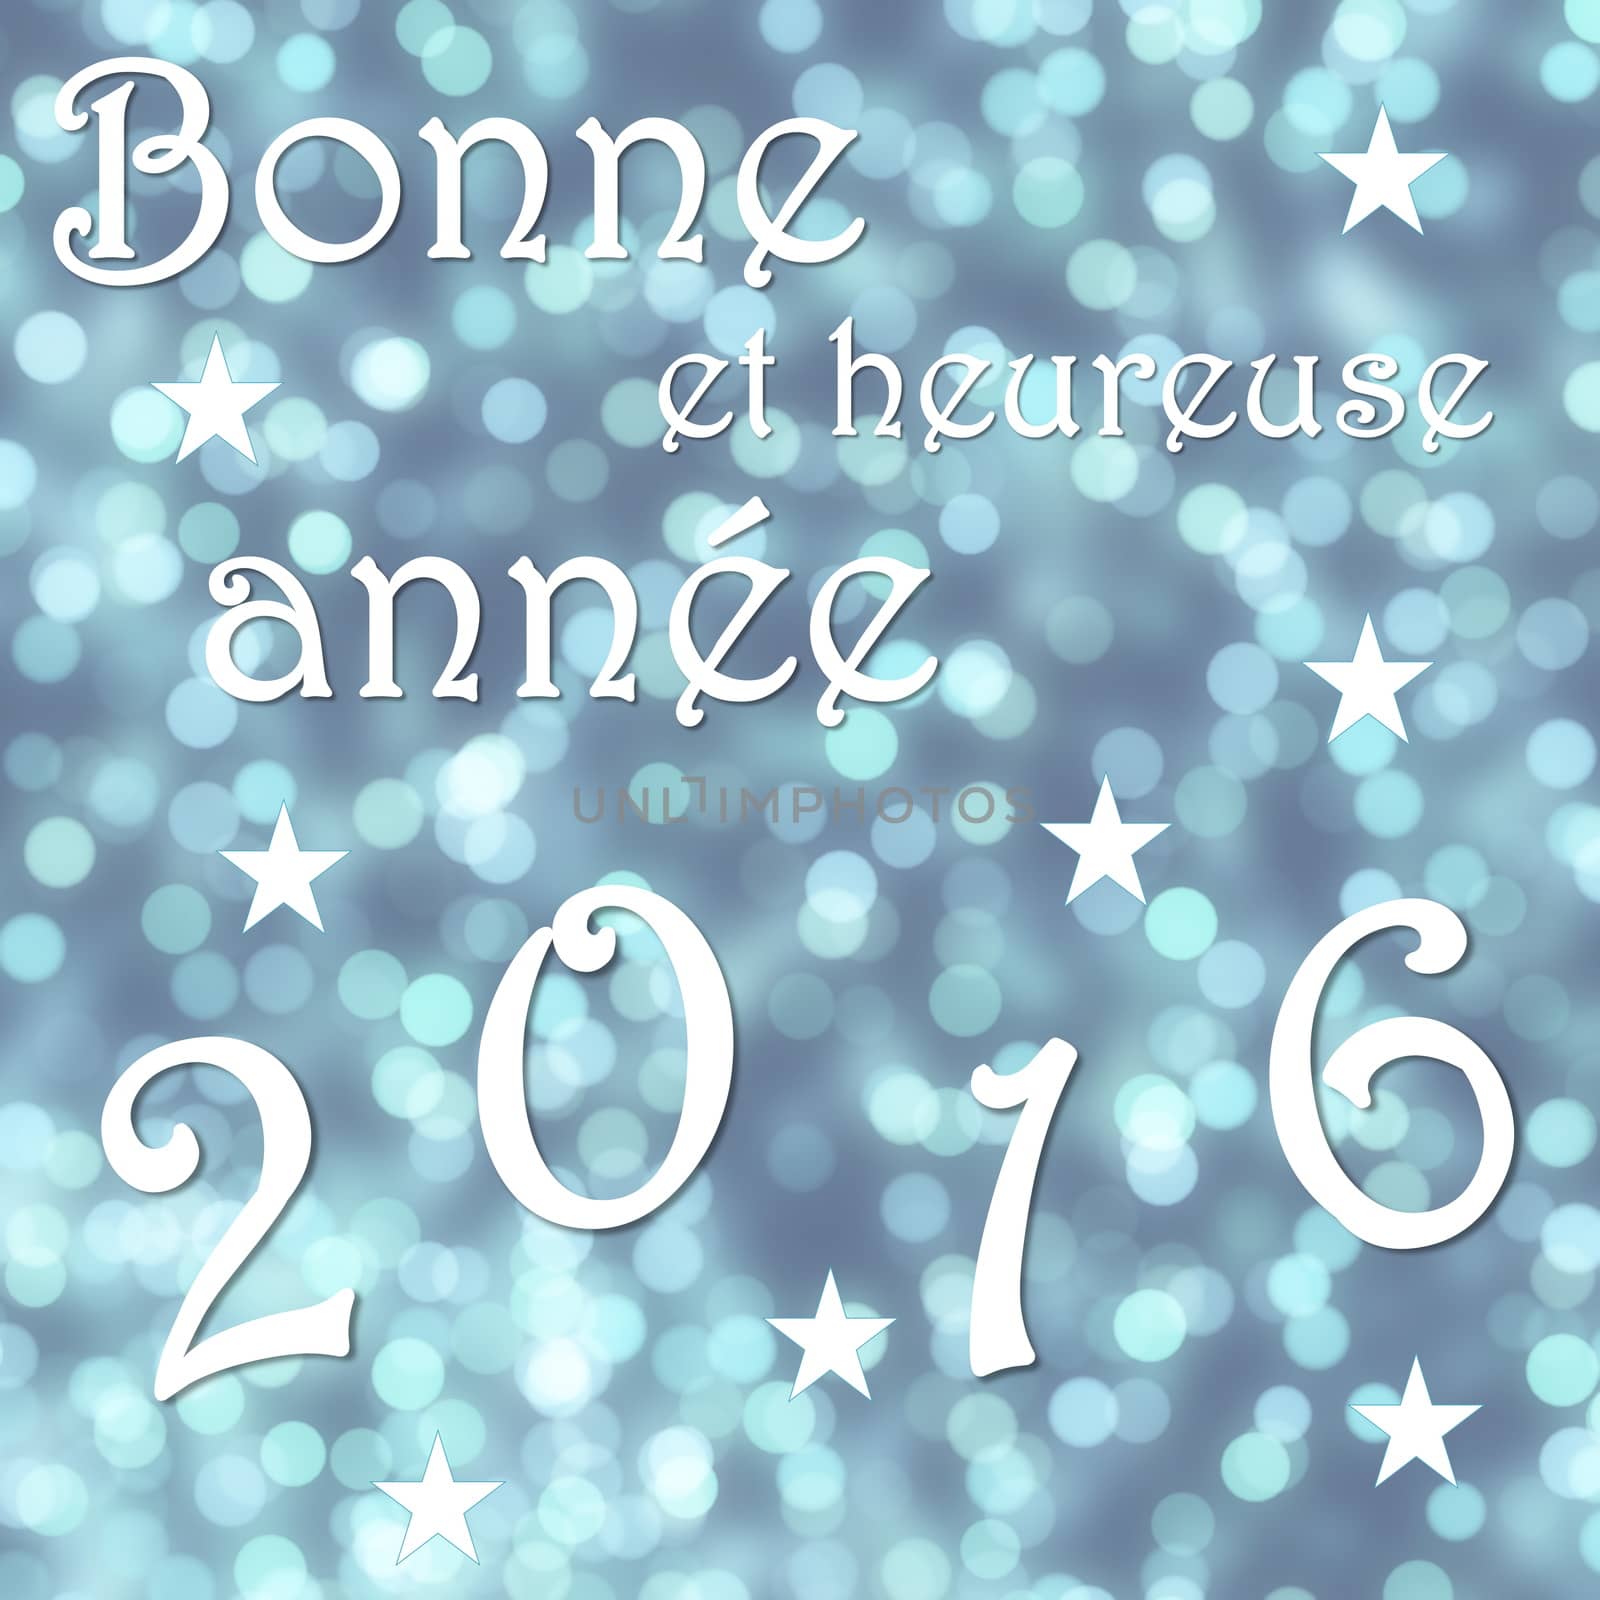 Happy new year 2016, french - 3D render by Elenaphotos21